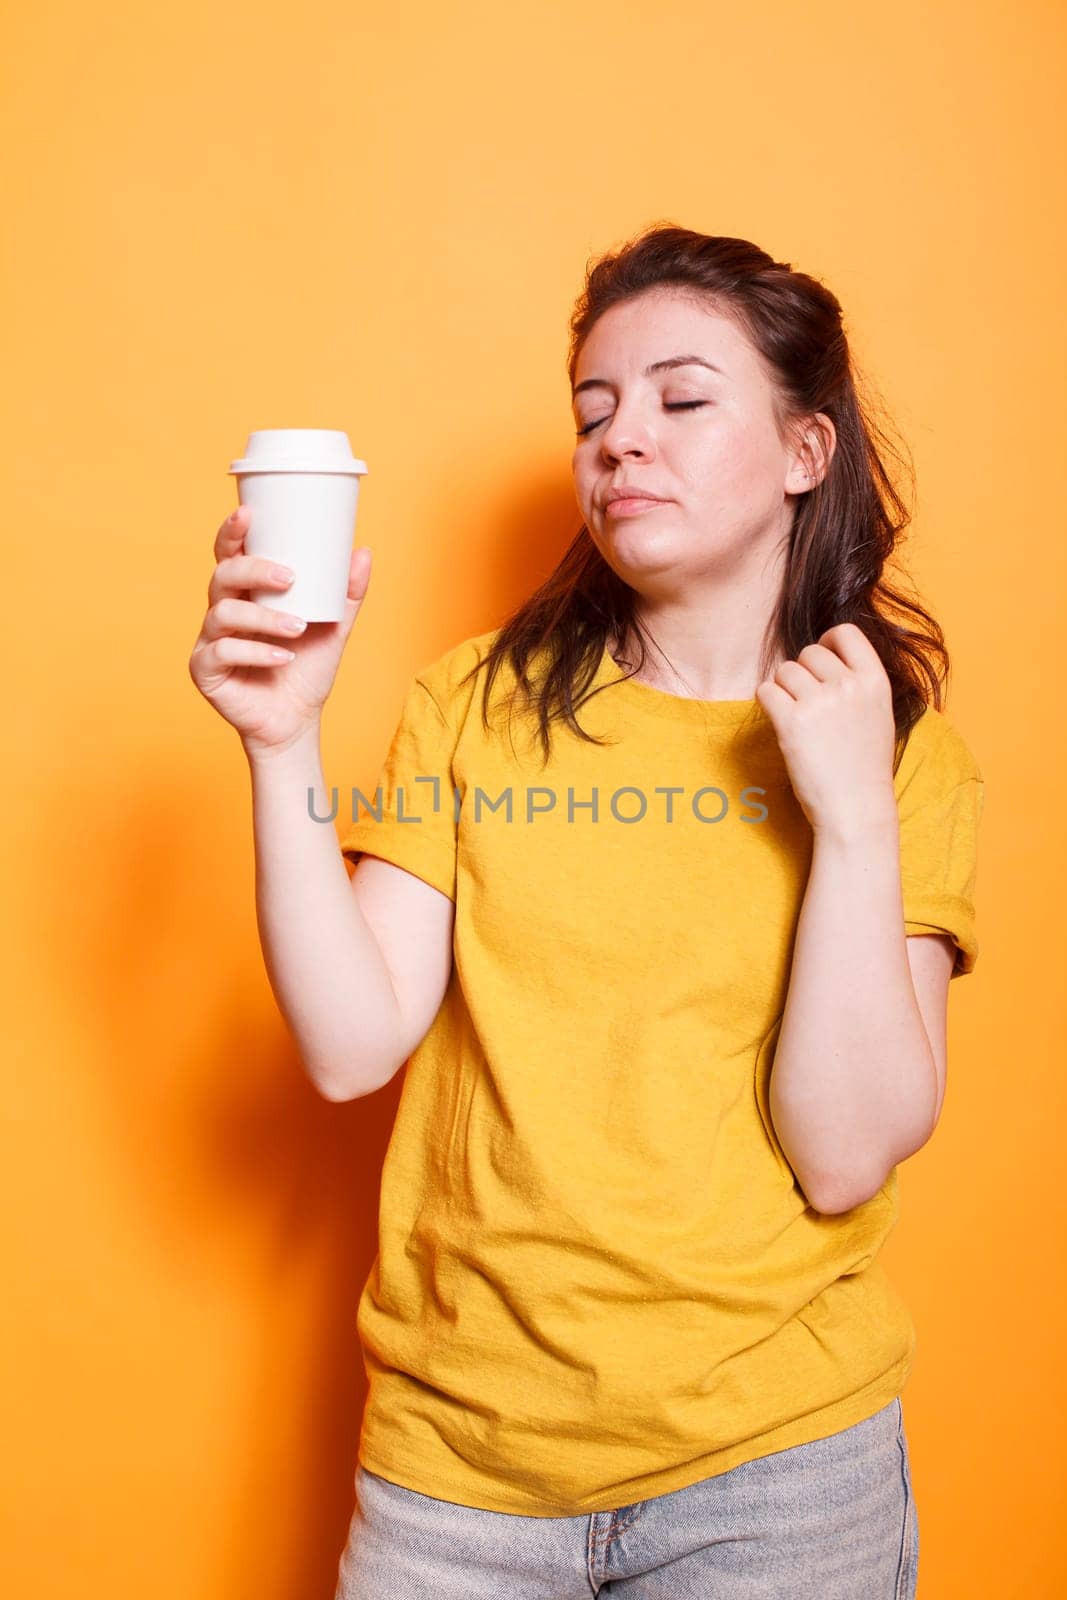 Tired woman posing against isolated orange background in casual clothes, holding coffee cup, relaxing with closed eyes. Sleepy expression of young brunette lady depicts exhaustion and weariness.